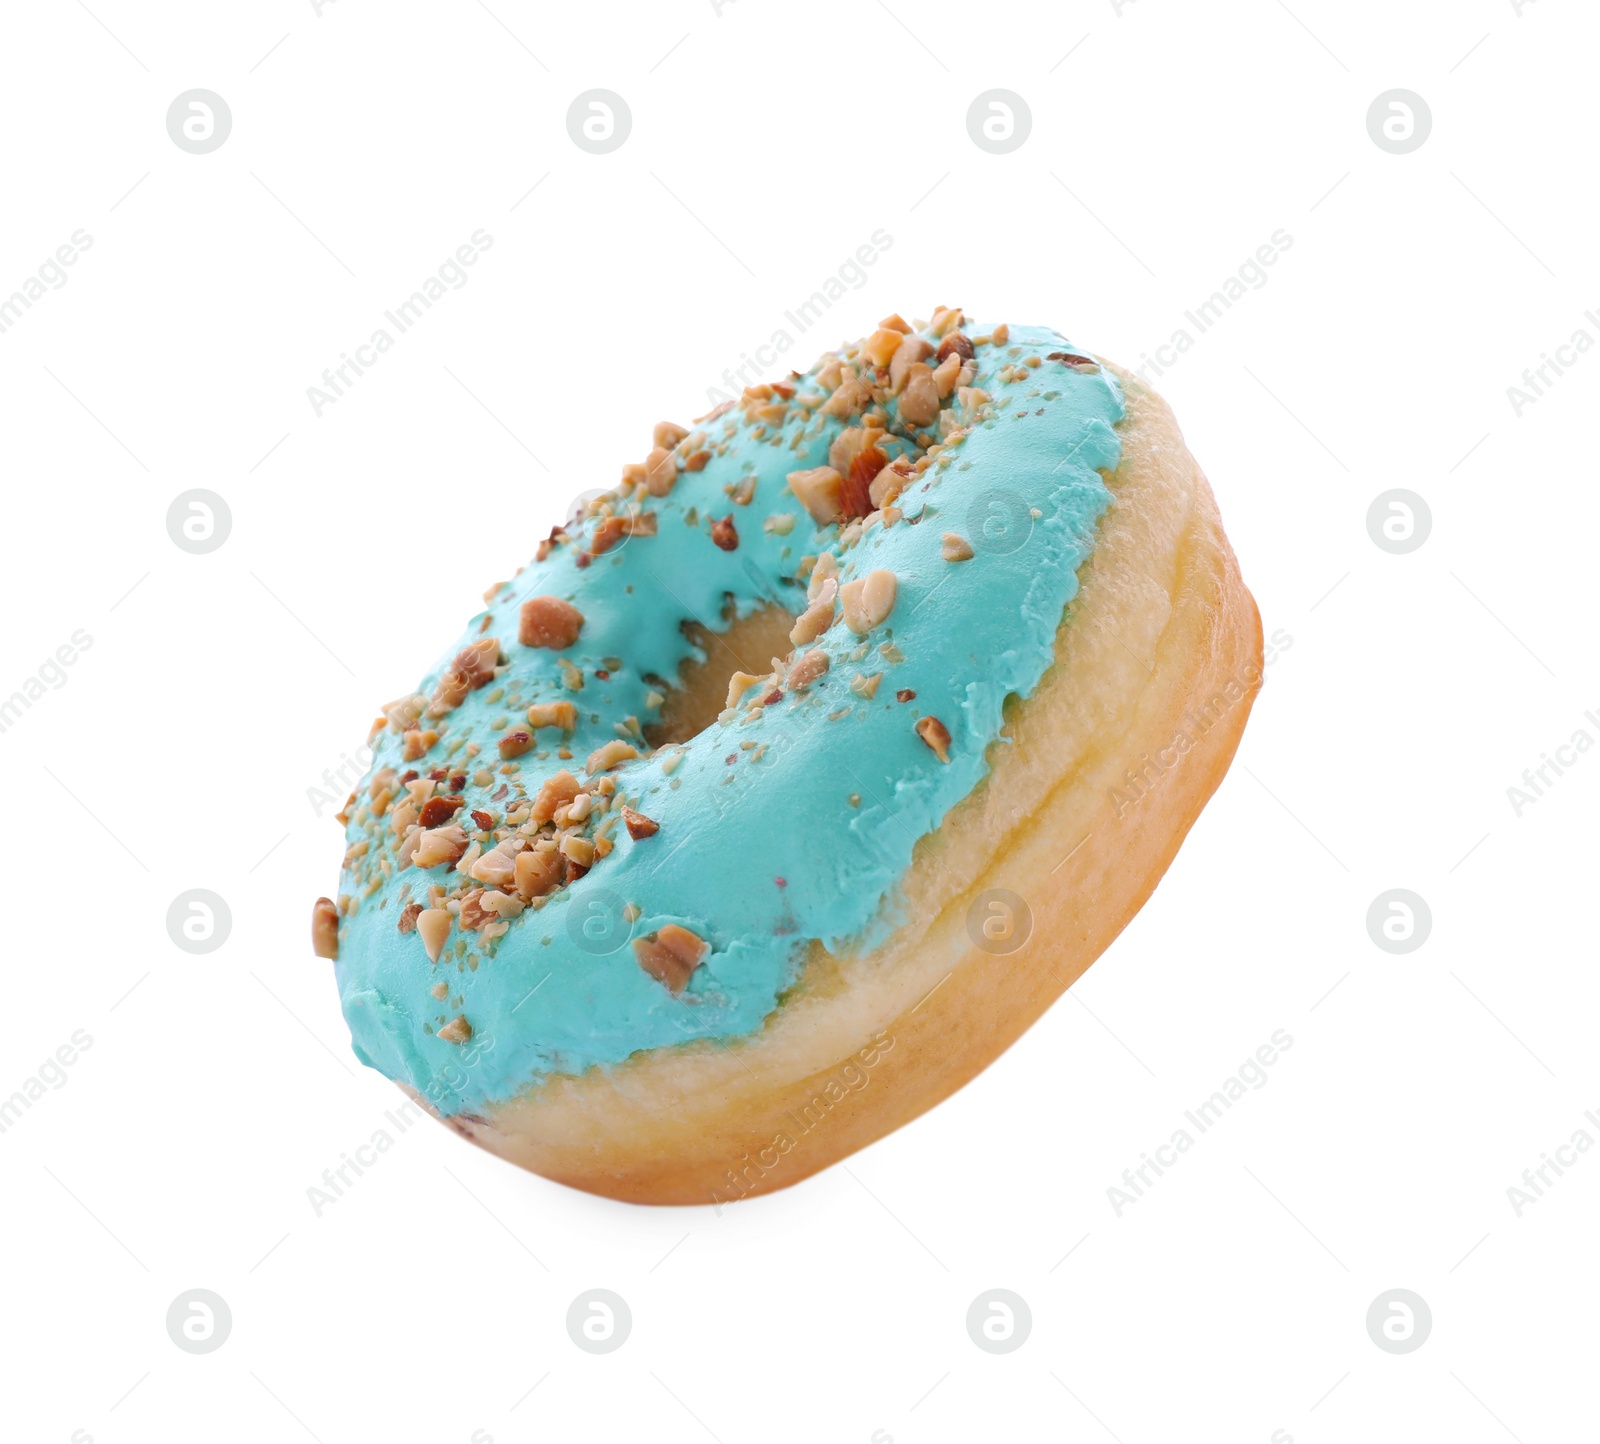 Photo of Tasty glazed donut decorated with nuts on white background